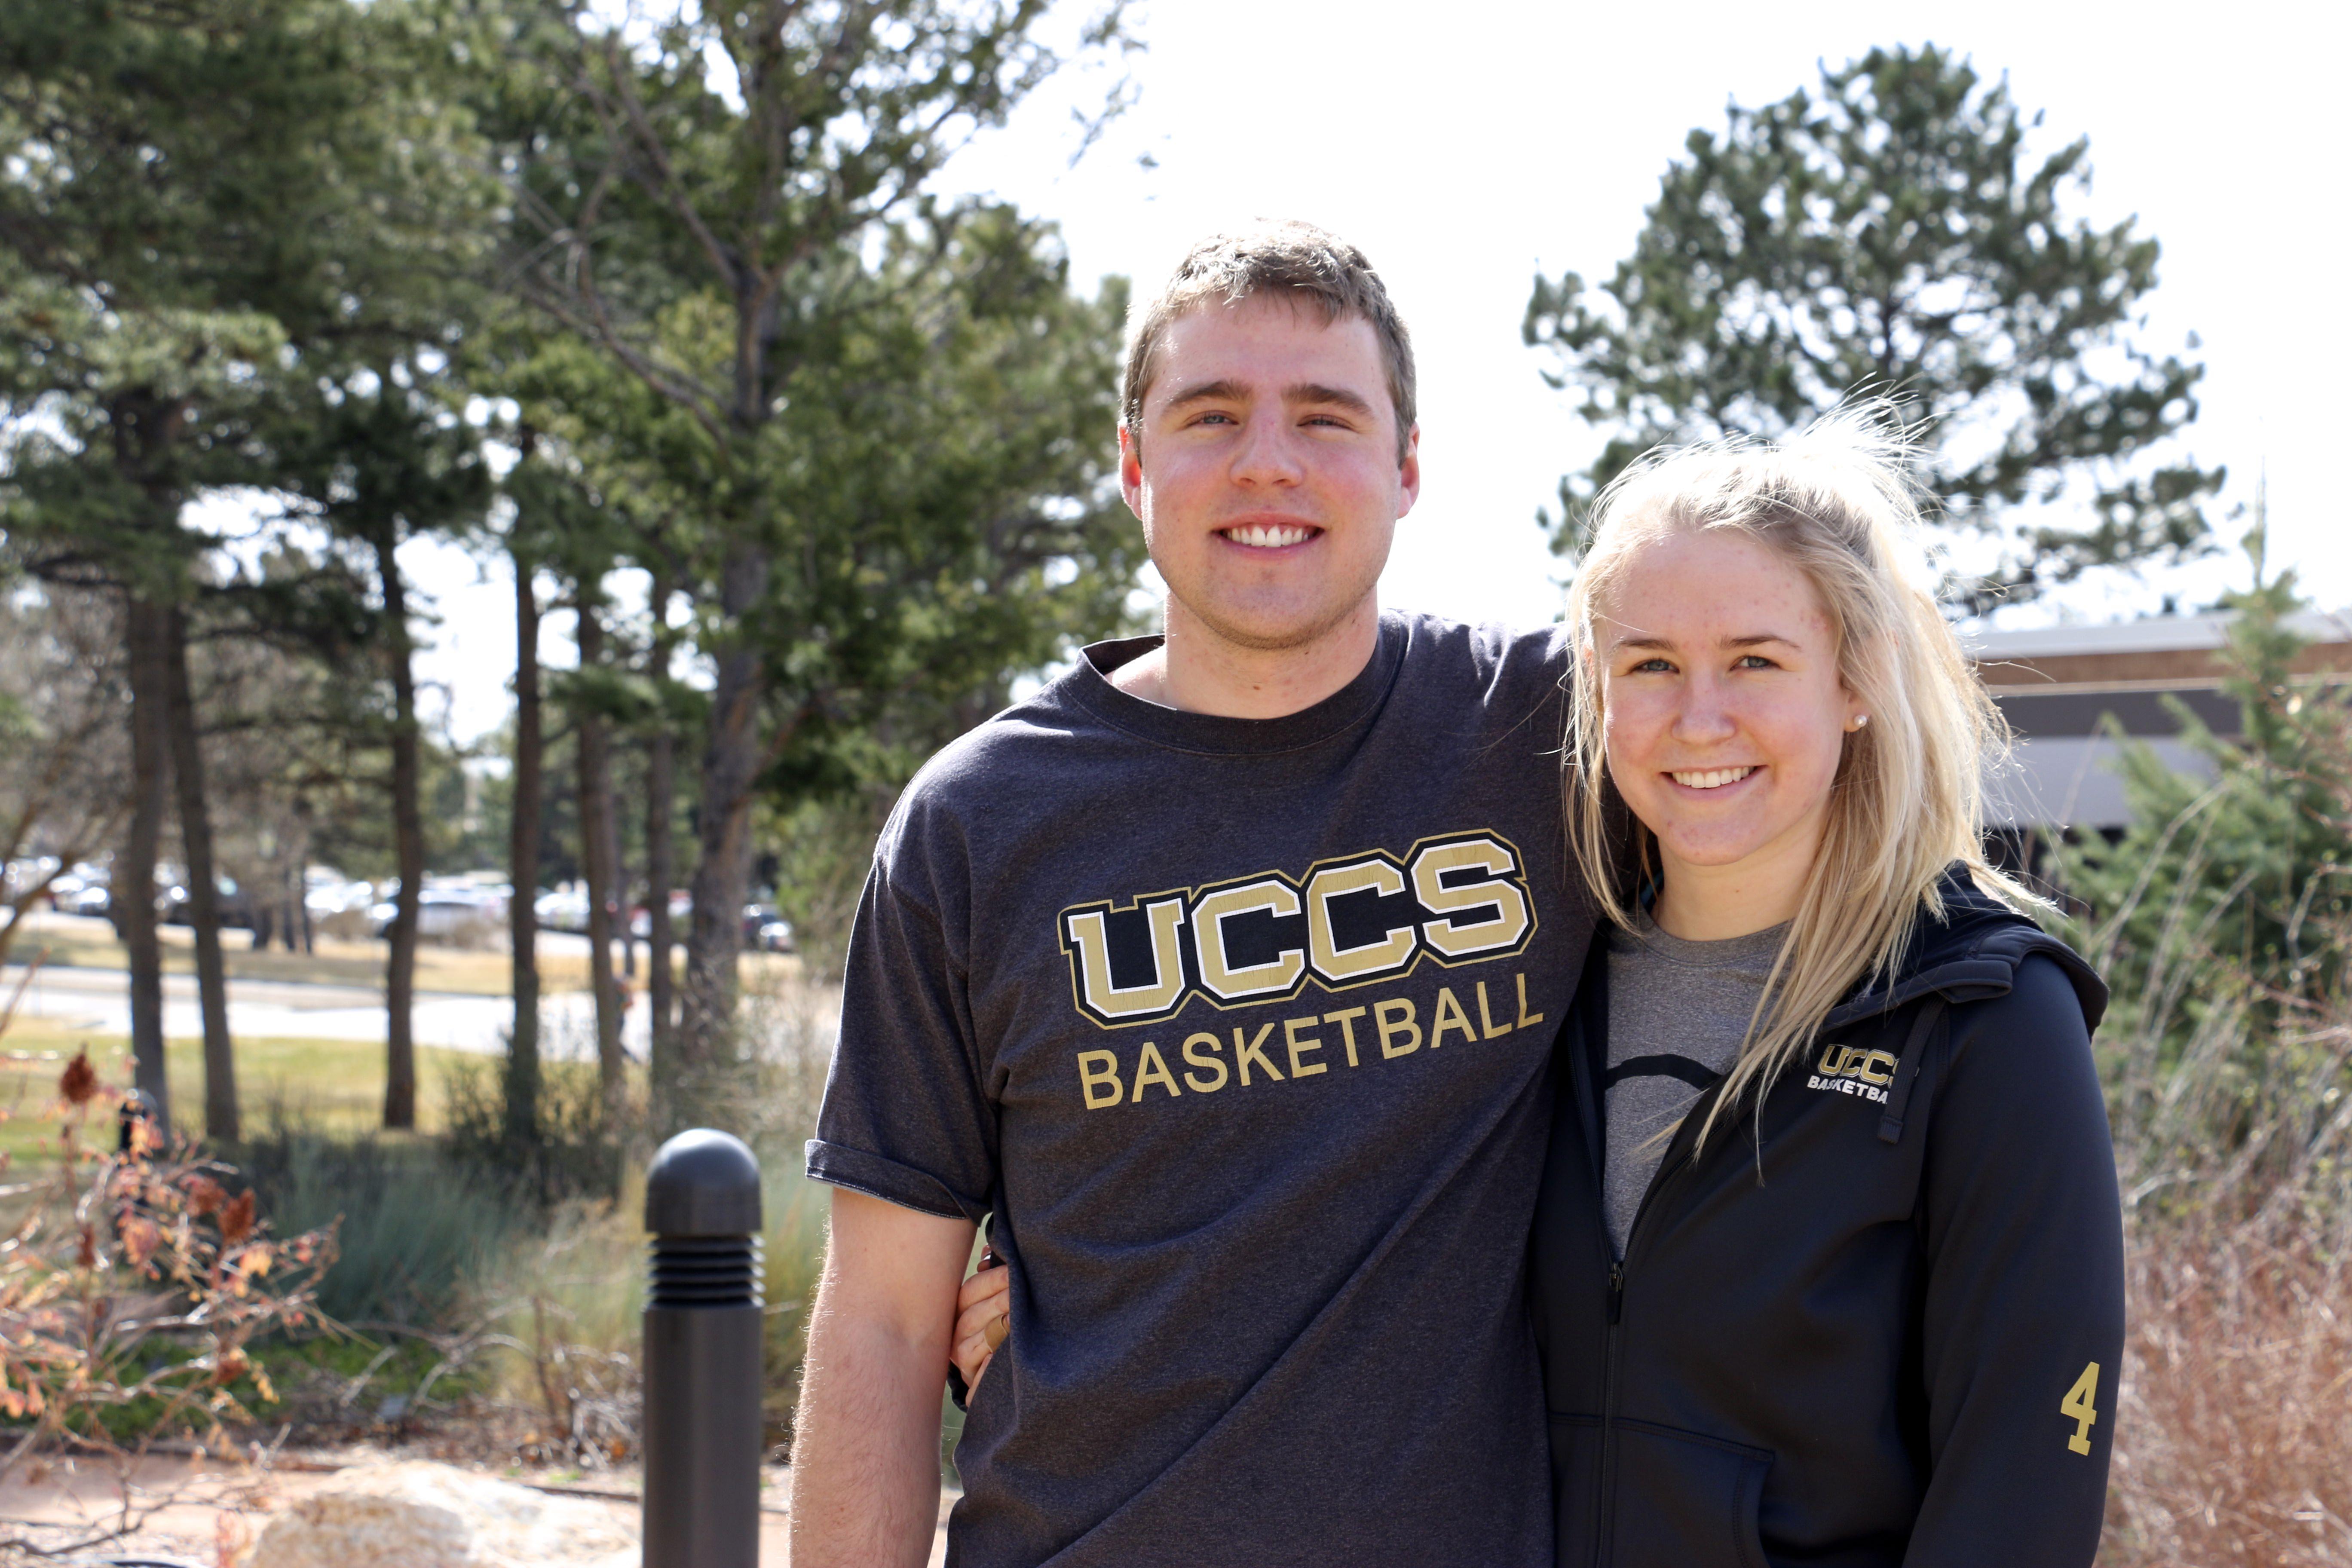 White Scores 50 as UCCS Wins First NCAA Tourney Game - UCCS Athletics